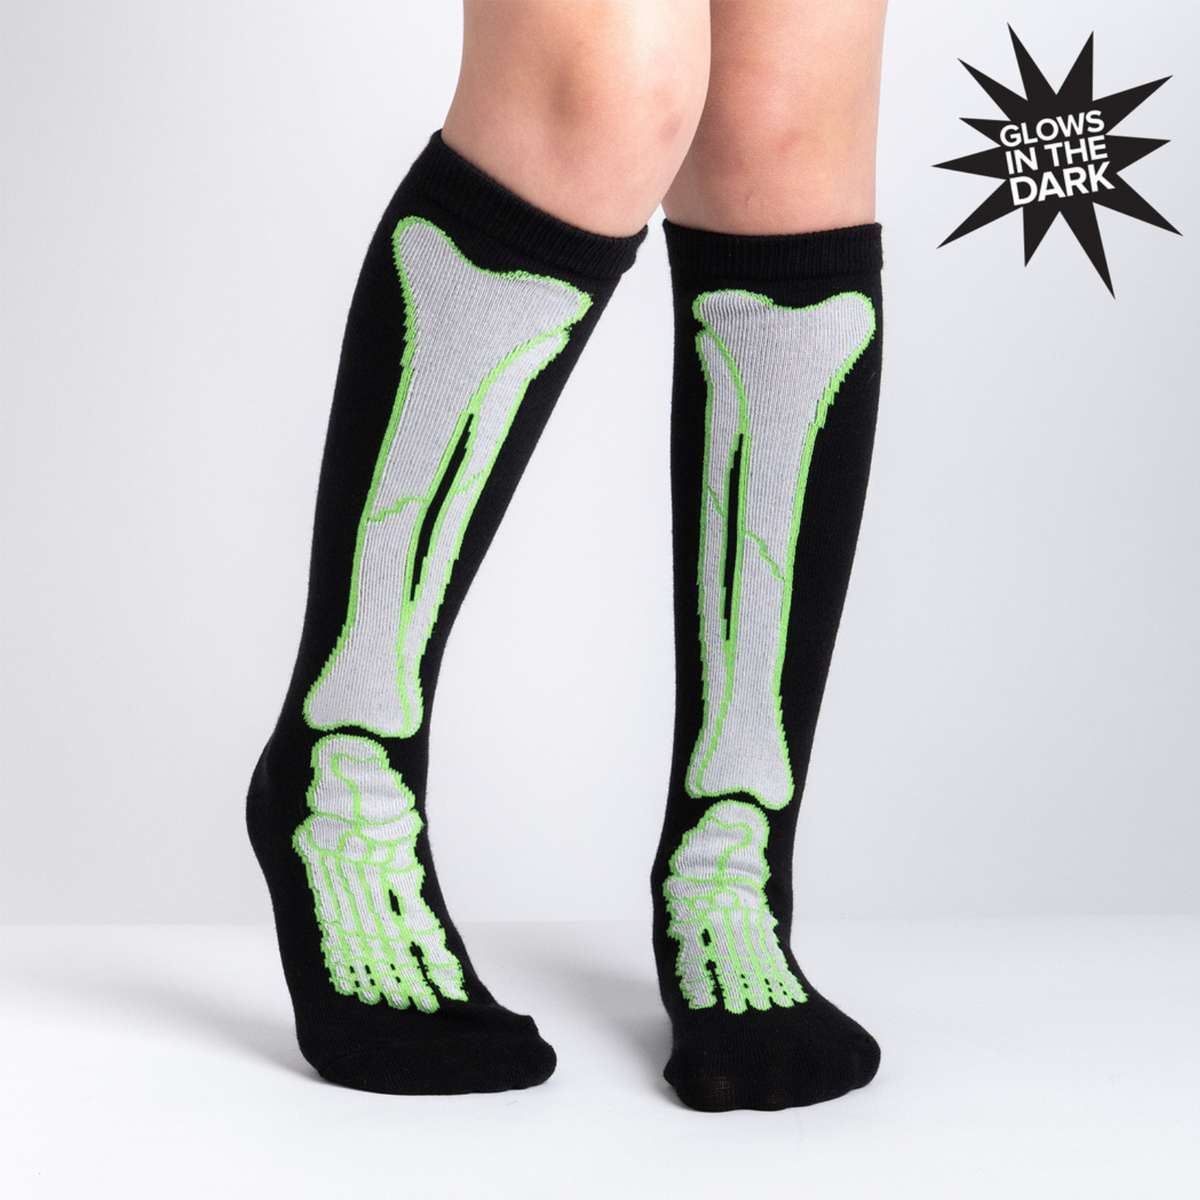 Sock It To Me It&#39;s Going Tibia Good Day kids&#39; sock (GLOW IN THE DARK!) featuring a black knee high sock with outline of tibia bones worn by model from front